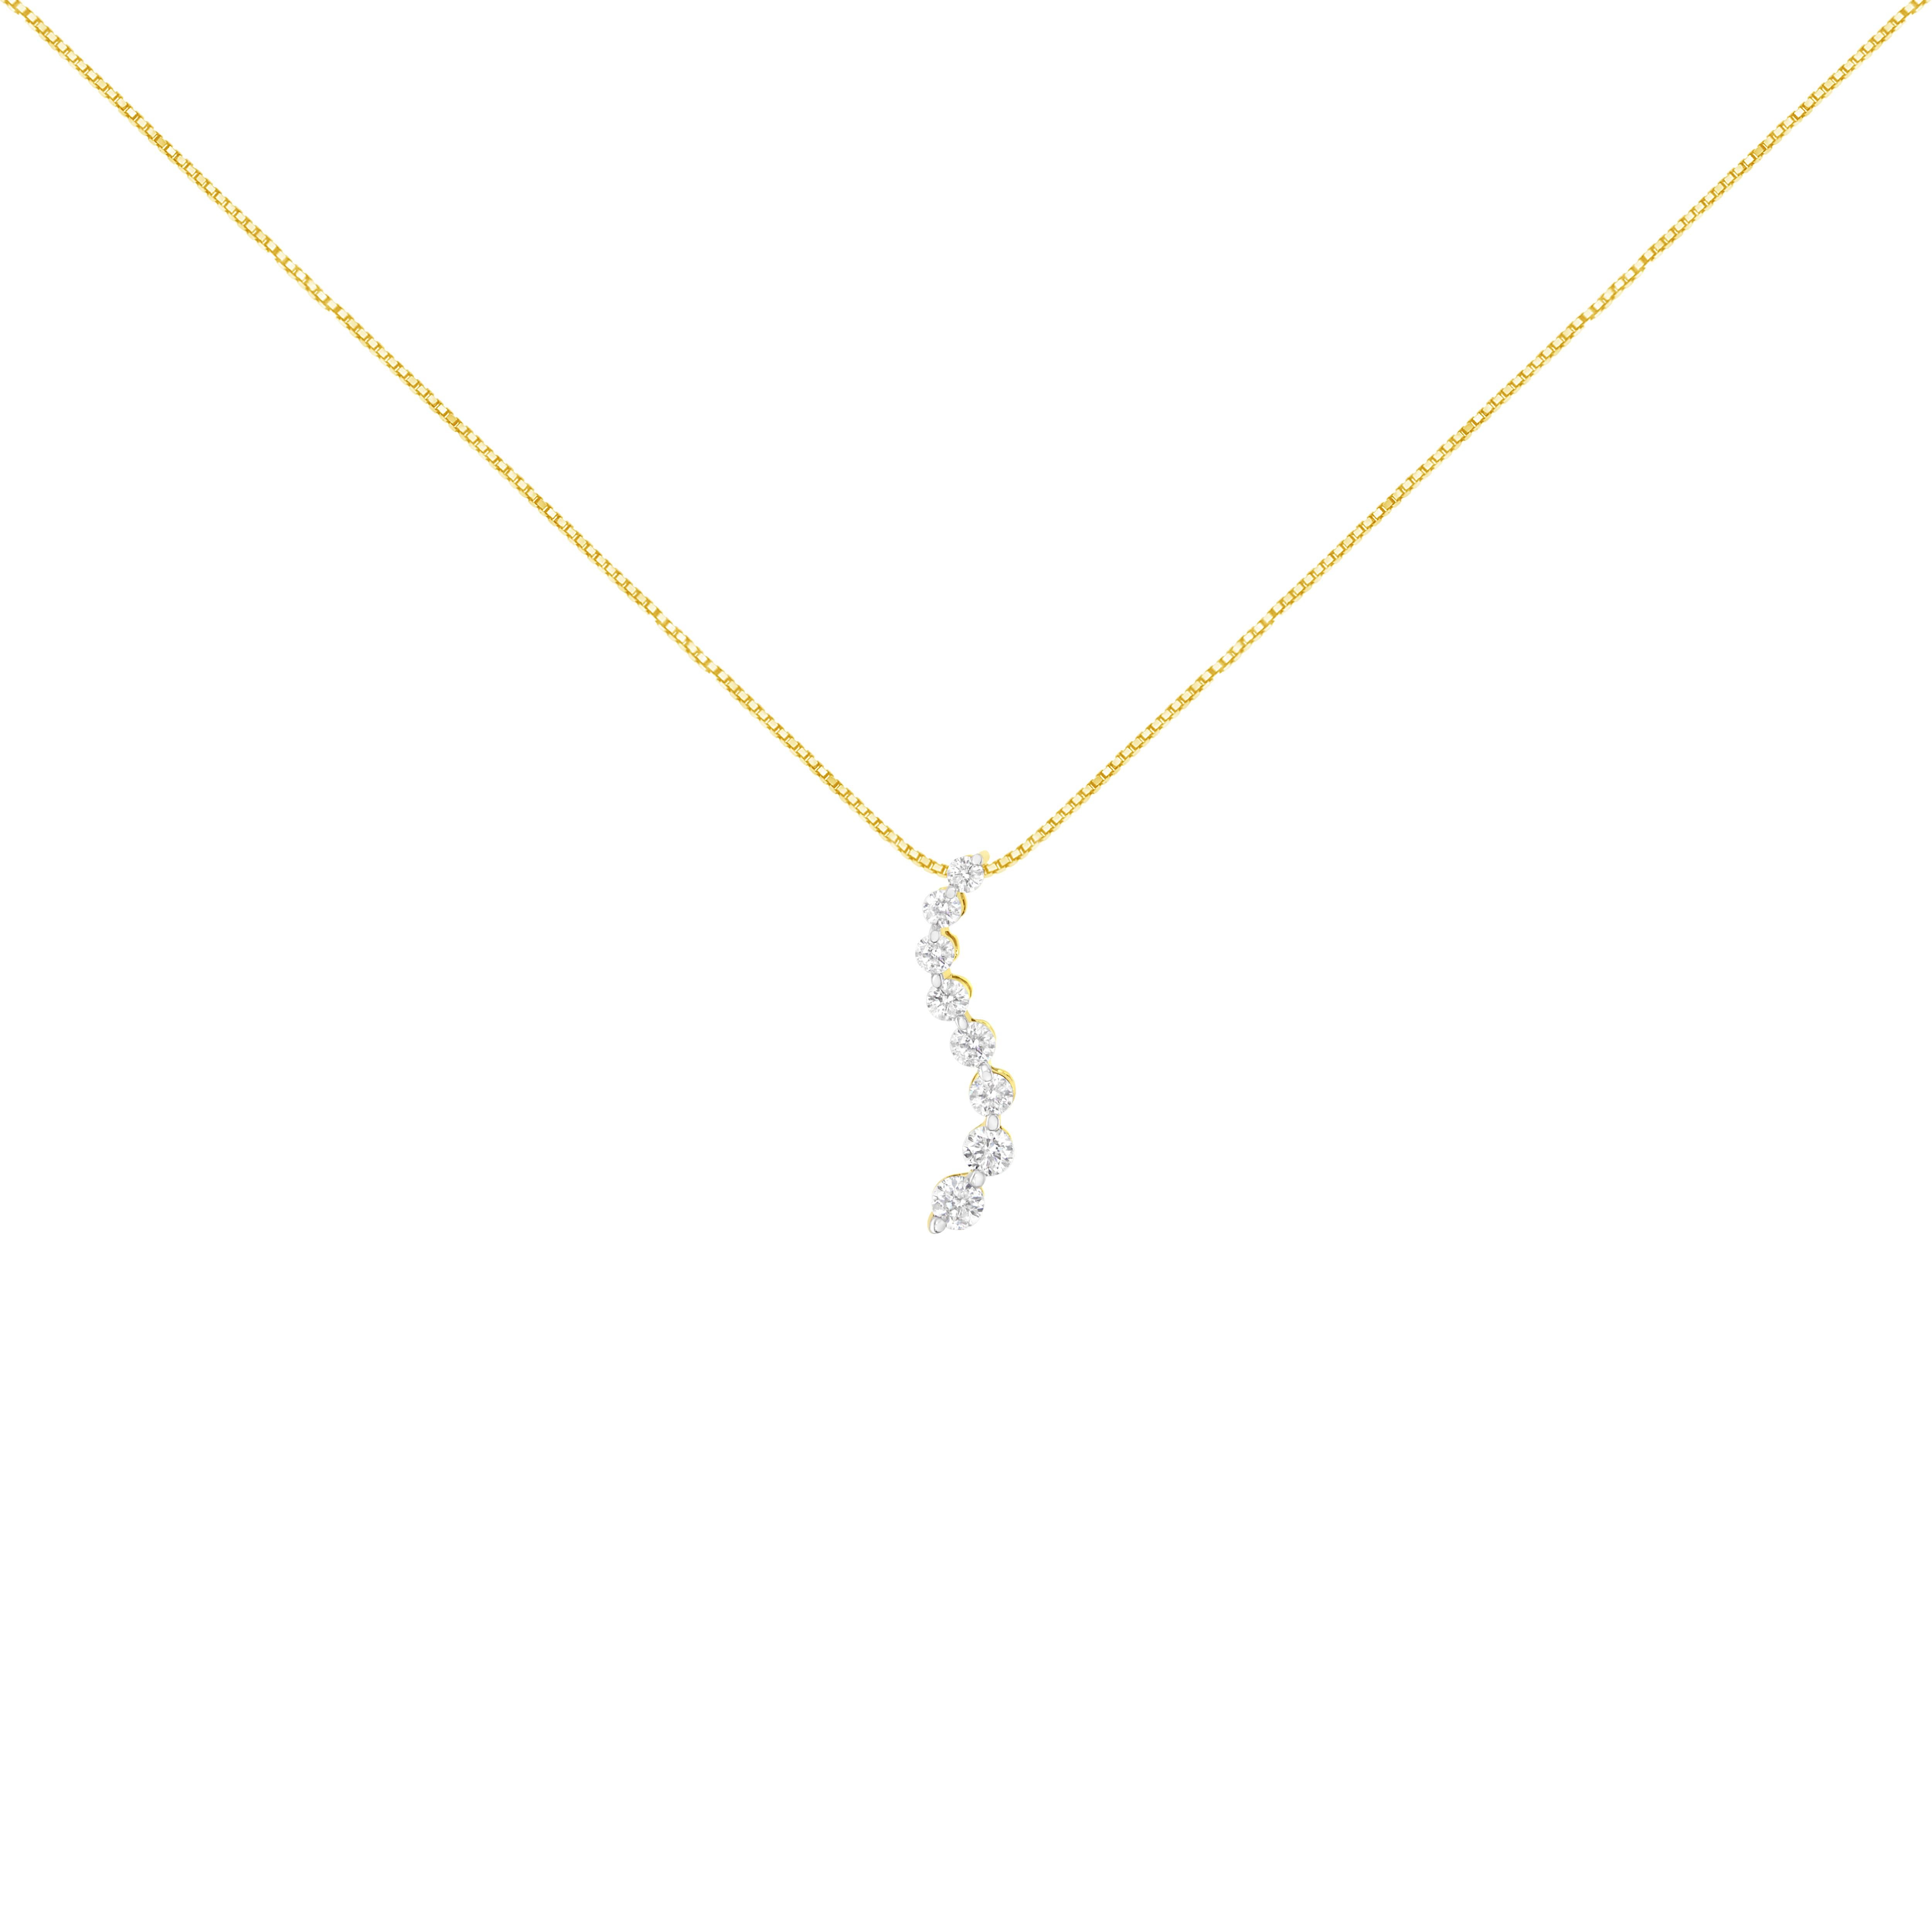 Surprise her by gifting her this beautiful 3.00 cttw diamond journey pendant on any special occasion. Featuring a classy design, the pendant is crafted of warm 14kt yellow gold. It is elegantly adorned with sparkling 8 graduating, prong-set round